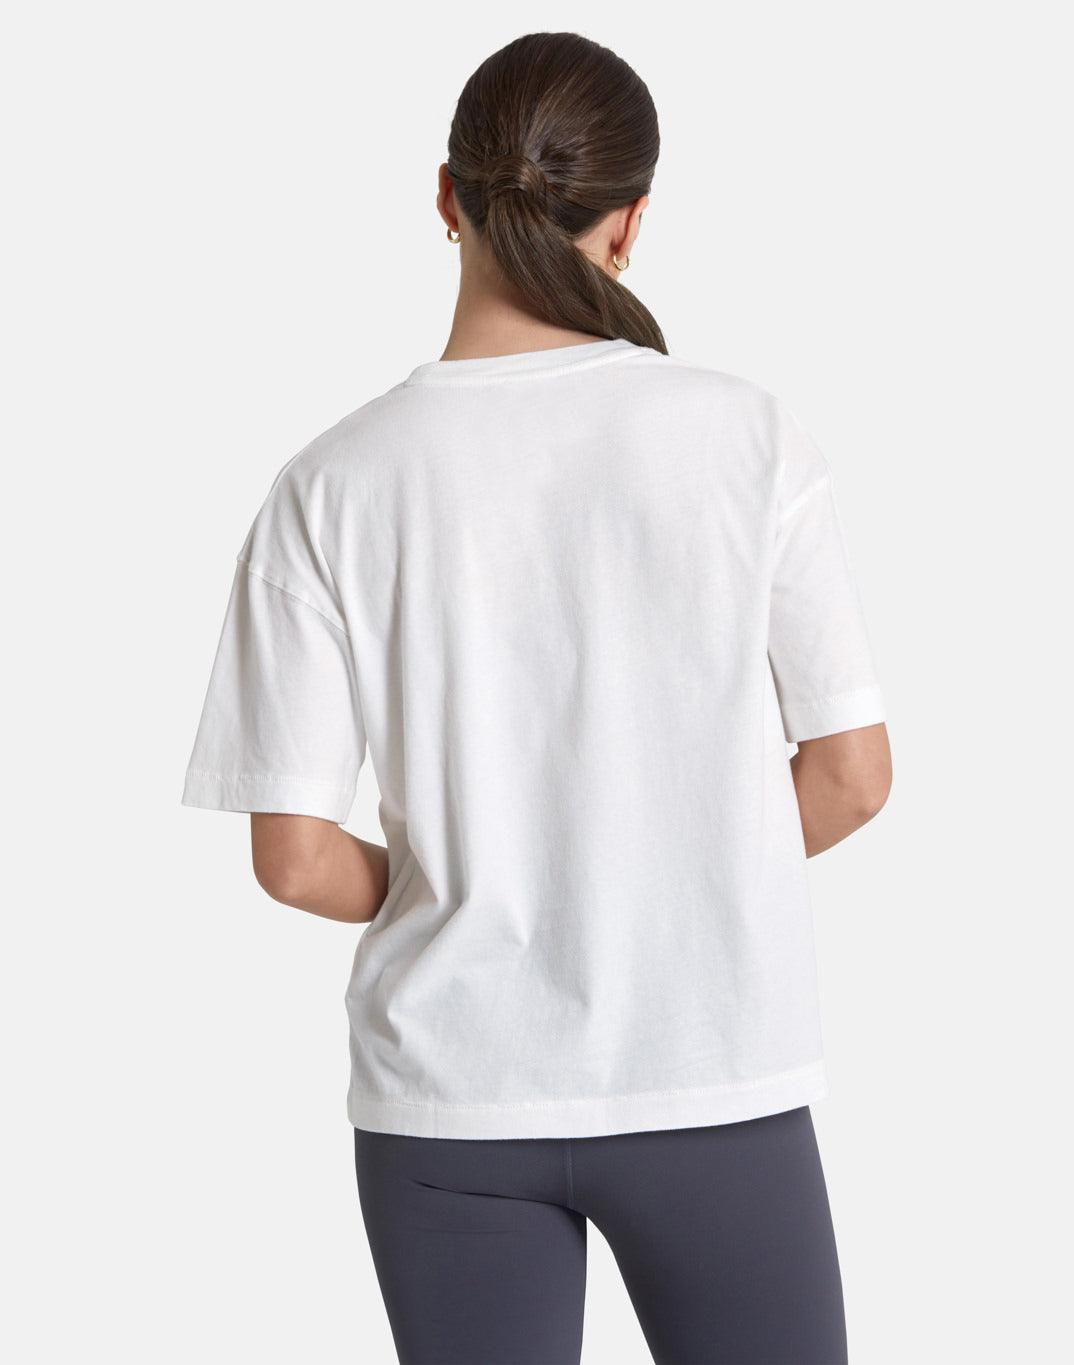 Essential Tee in Ivory White - T-Shirts - Gym+Coffee